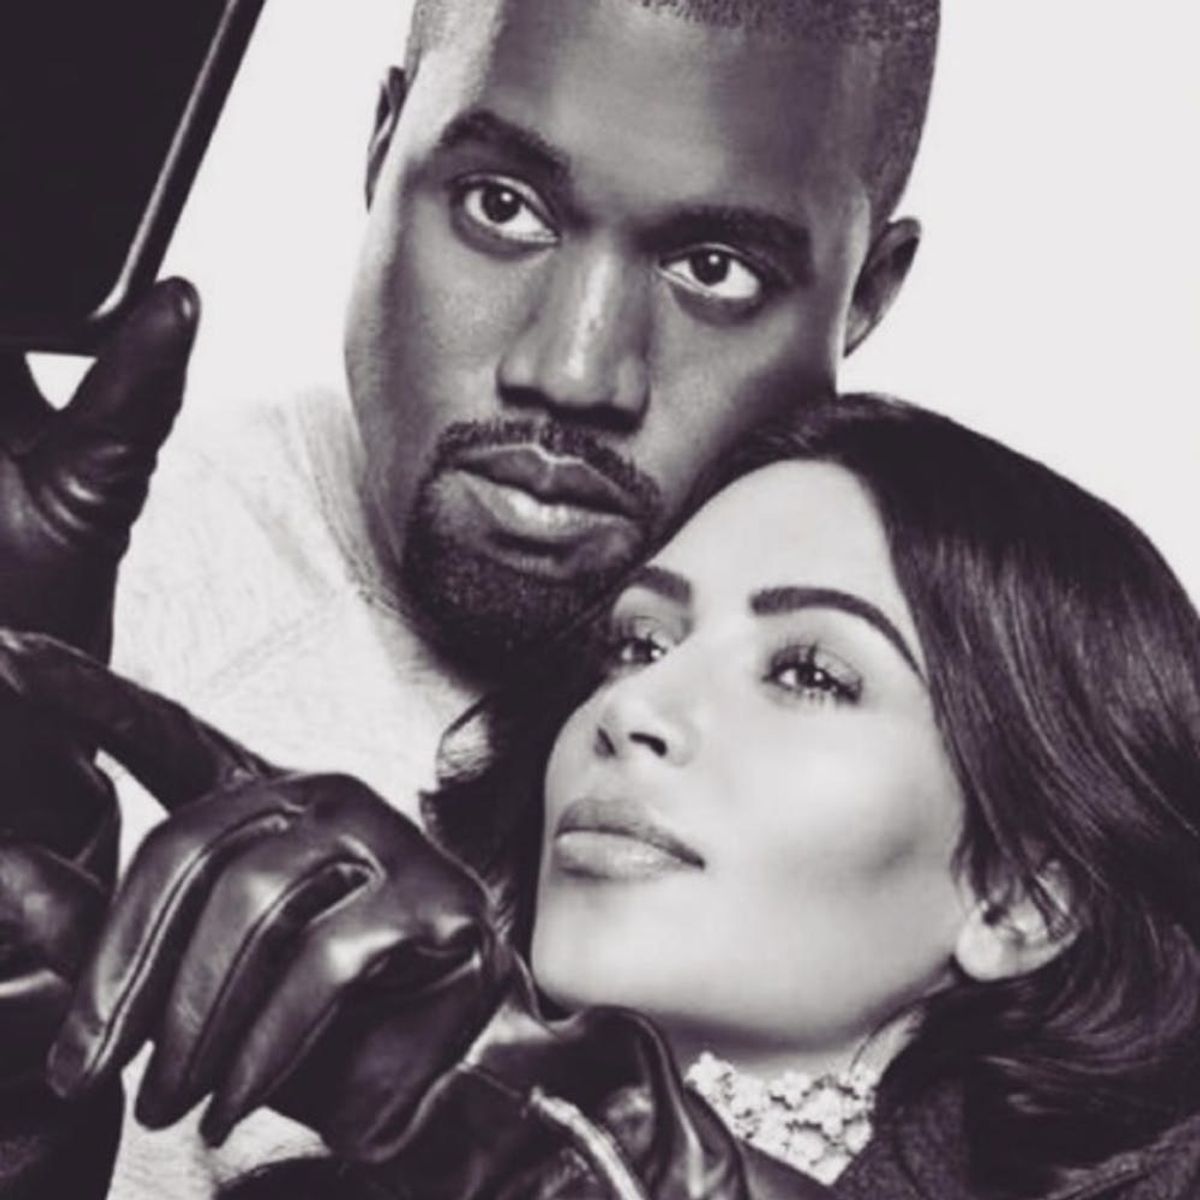 Kim’s Request for a Marriage Break May Have Been What Sent Kanye to the Hospital